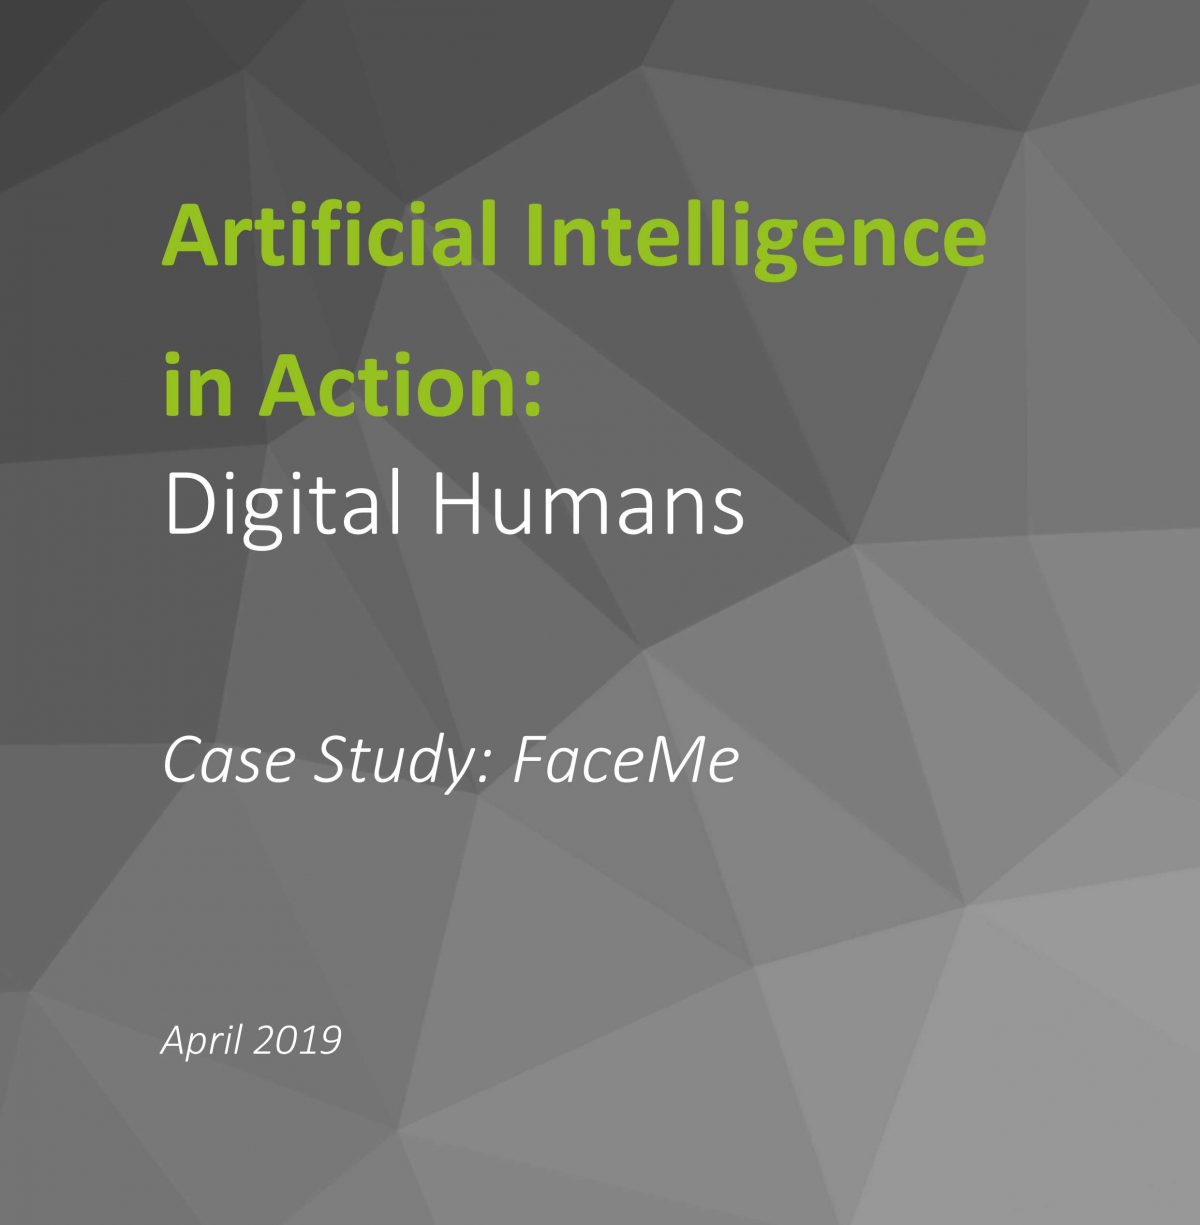 Artificial Intelligence in Action: Digital Humans Case Study